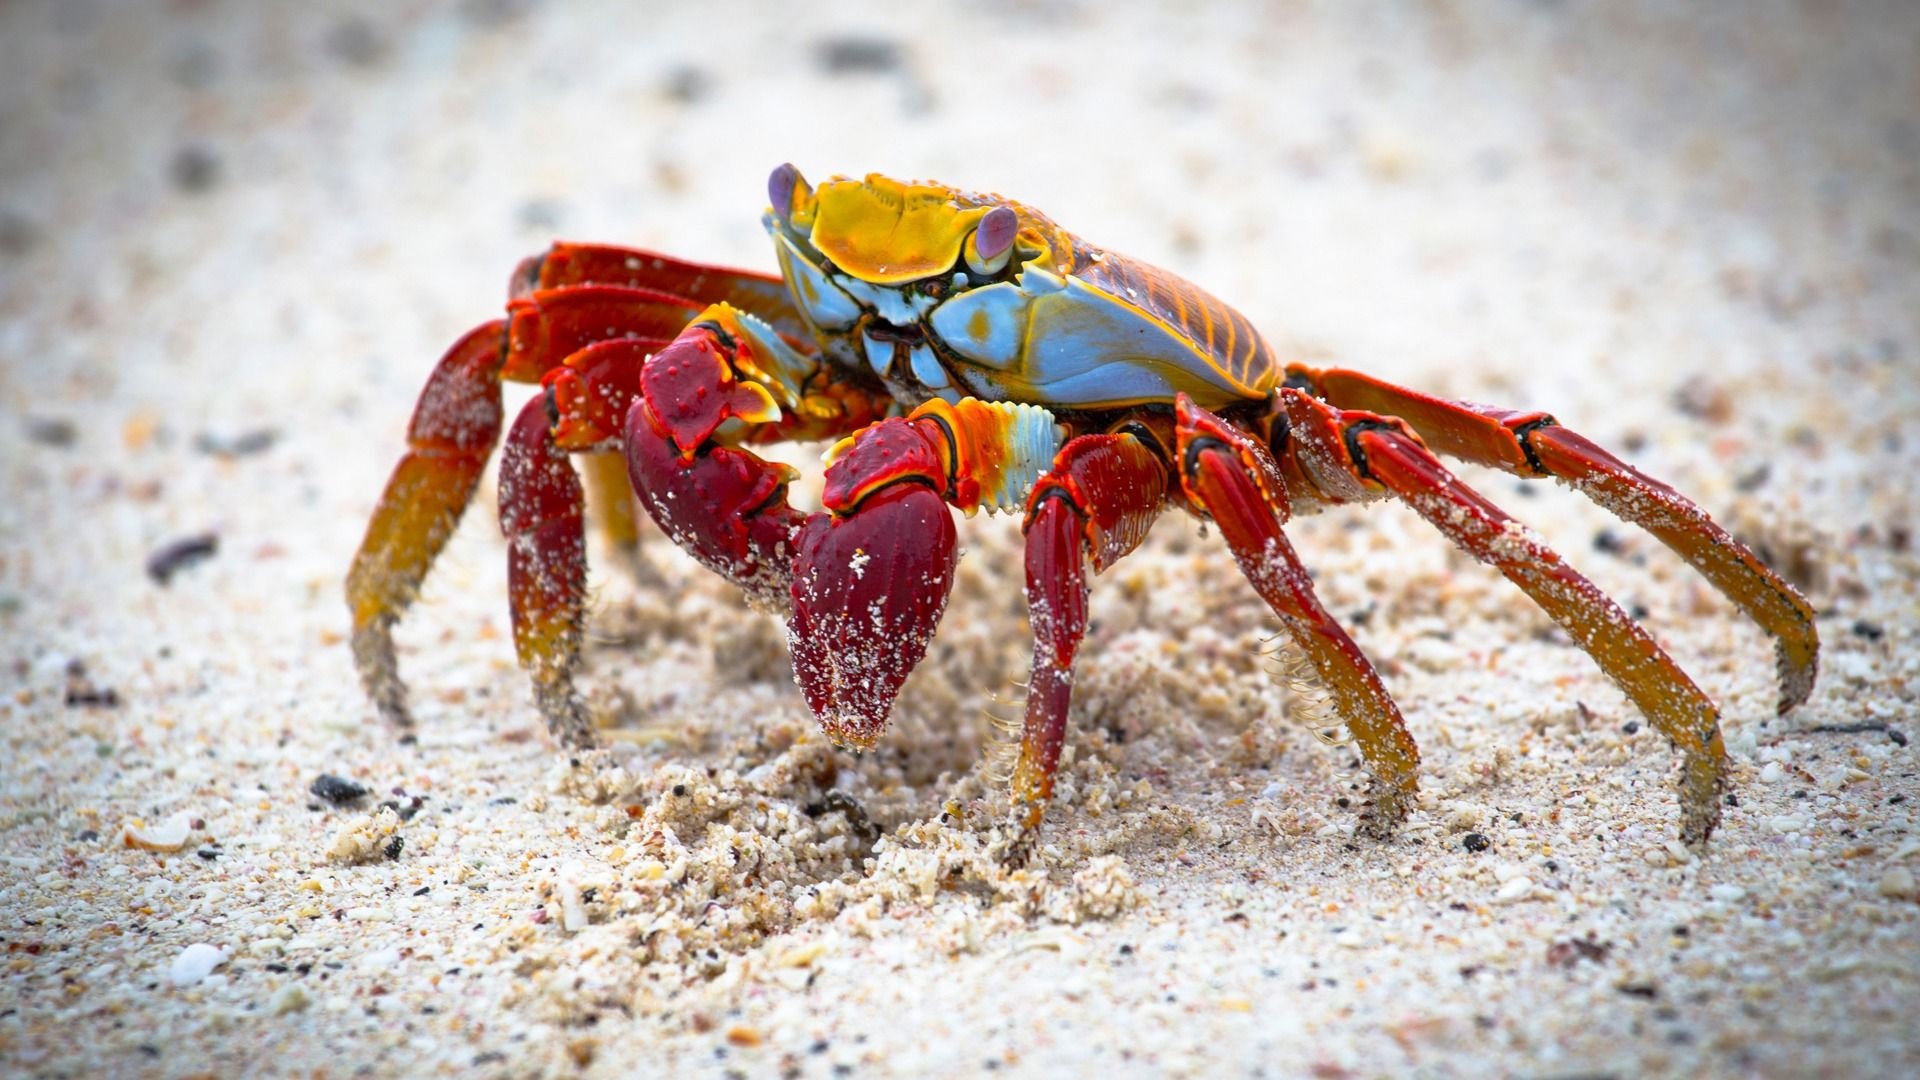 Crab: Swimming species use the hind legs as paddles to move when in water. 1920x1080 Full HD Wallpaper.